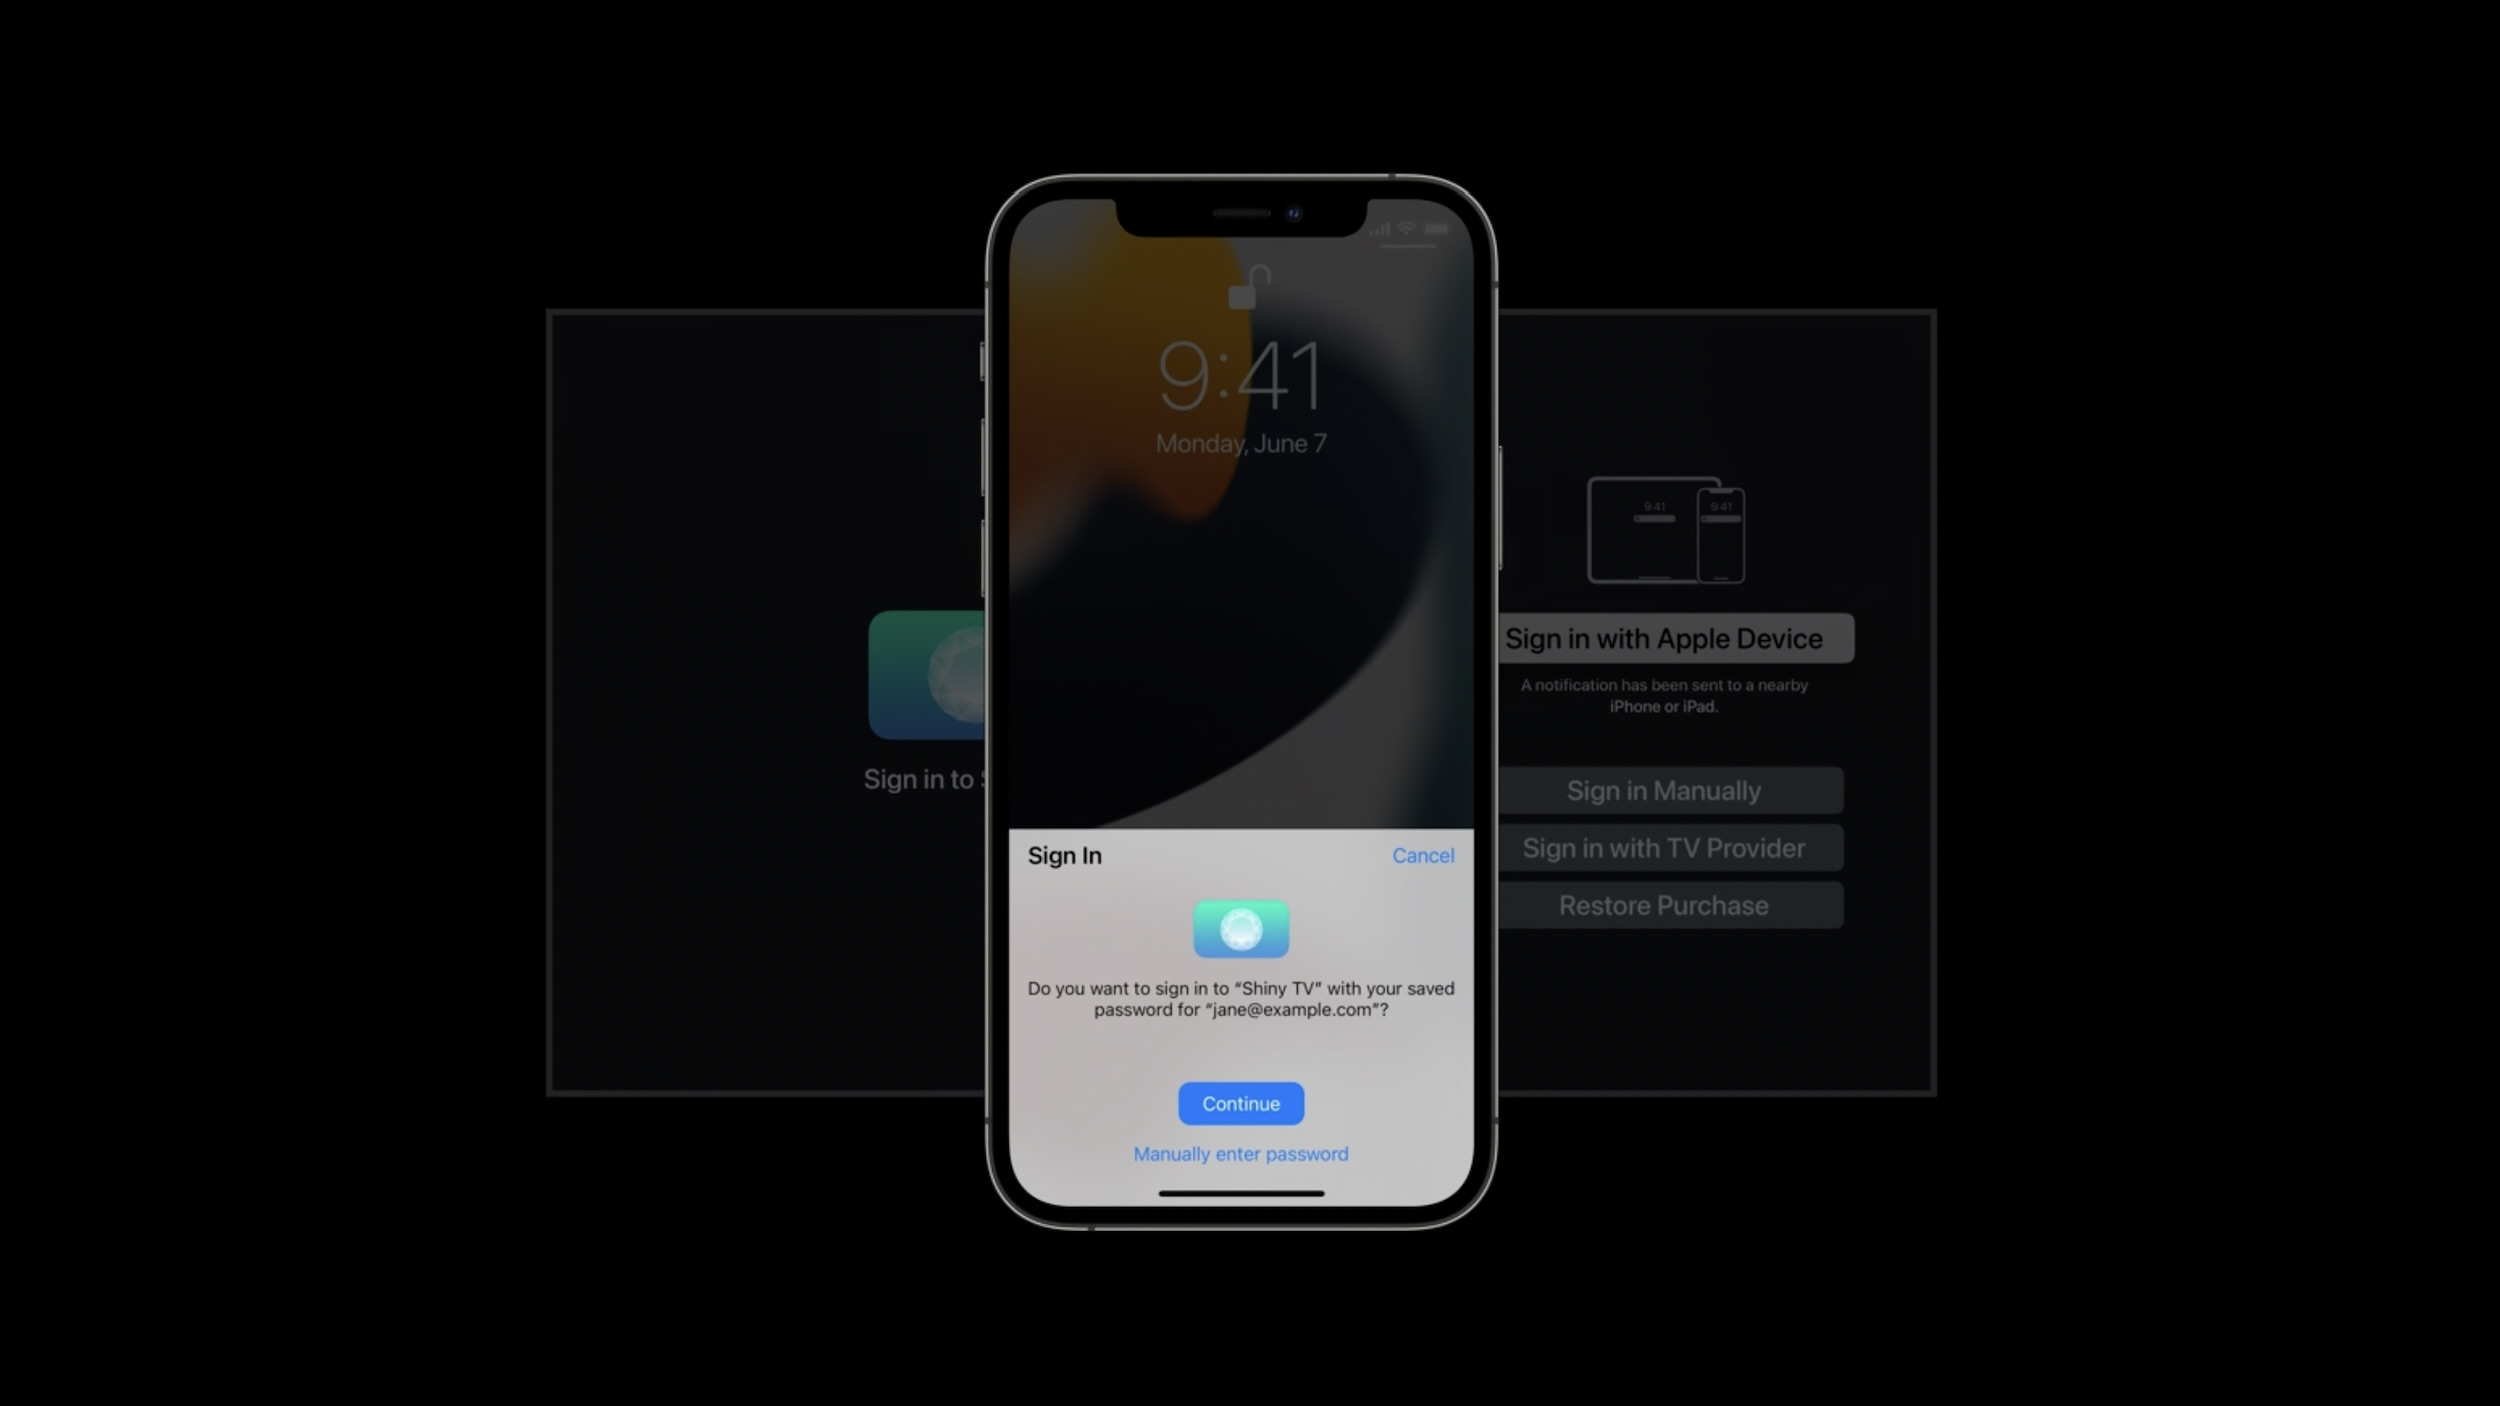 Log in/ signup using Touch ID or Face ID